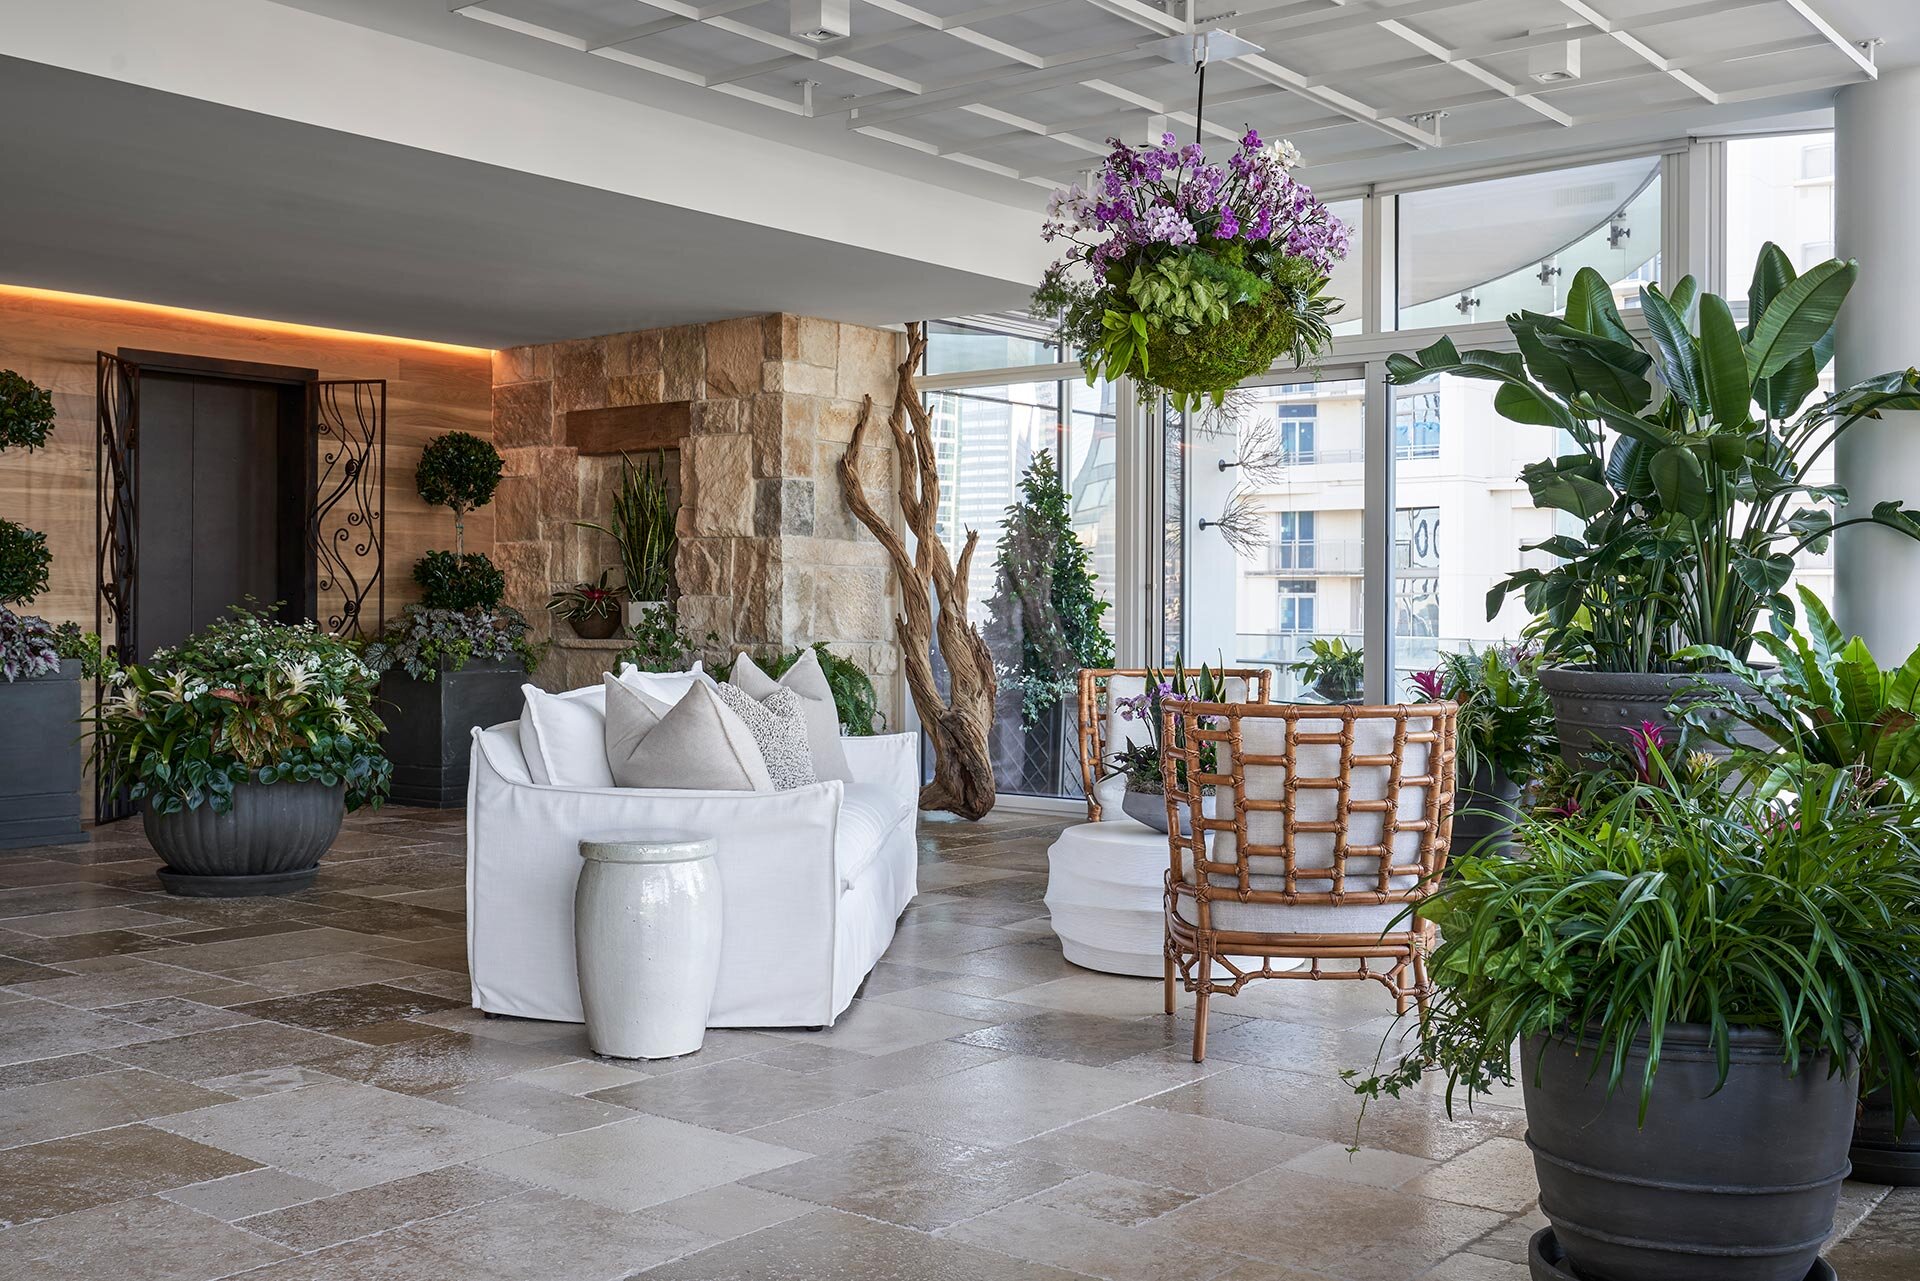  Modern comfortable contemporary in Museum Tower high-rise in downtown Dallas, Texas featuring custom metalwork gates, greenery and exterior materials create a garden atmosphere 